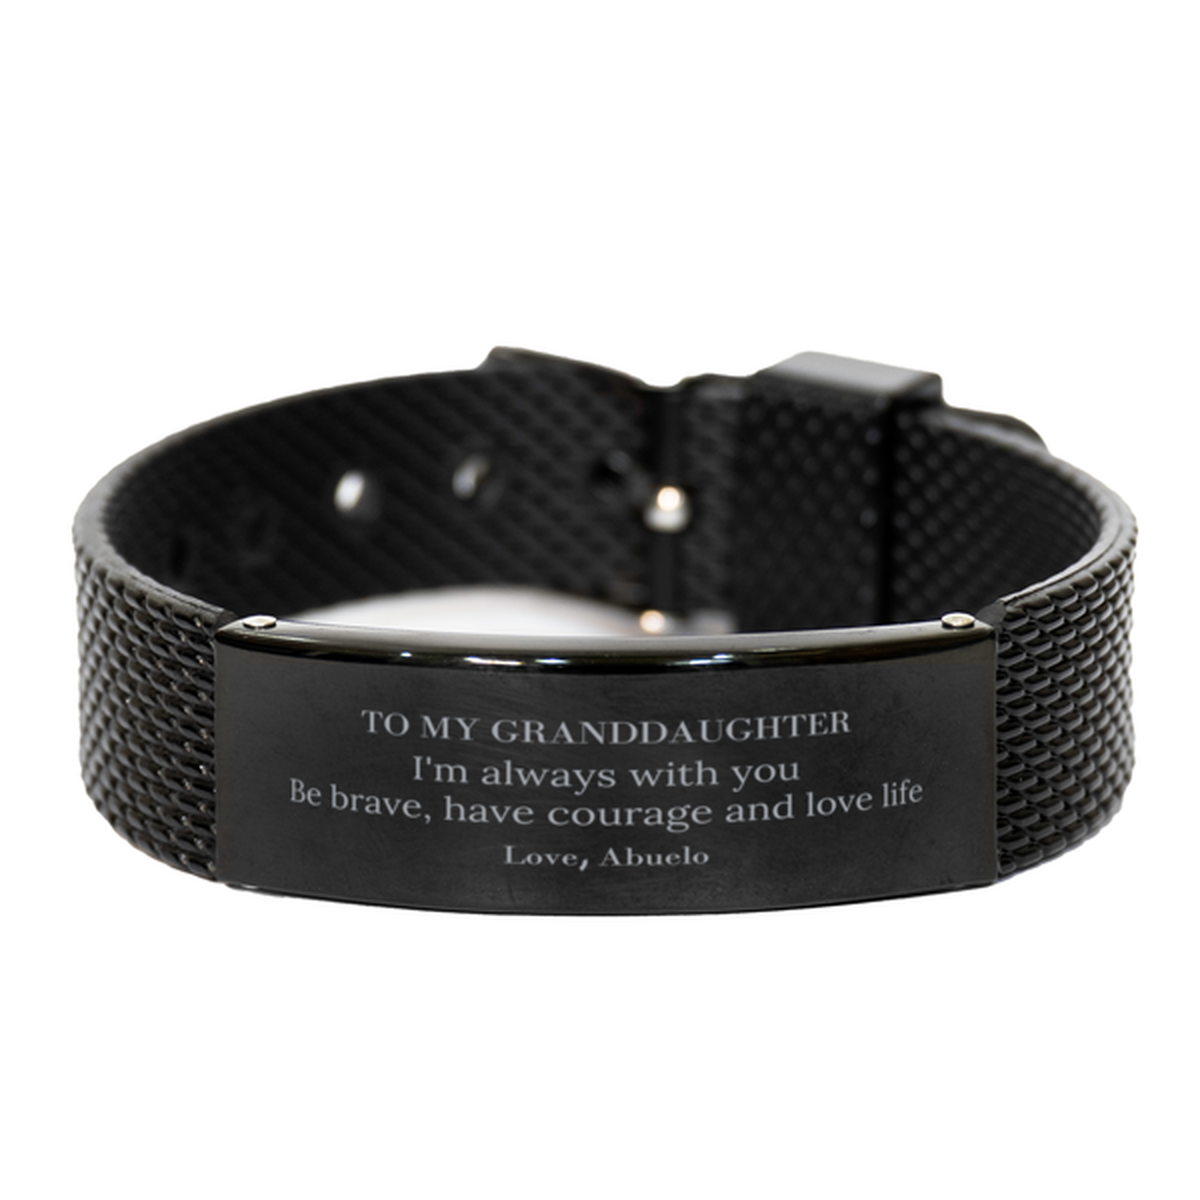 To My Granddaughter Gifts from Abuelo, Unique Black Shark Mesh Bracelet Inspirational Christmas Birthday Graduation Gifts for Granddaughter I'm always with you. Be brave, have courage and love life. Love, Abuelo